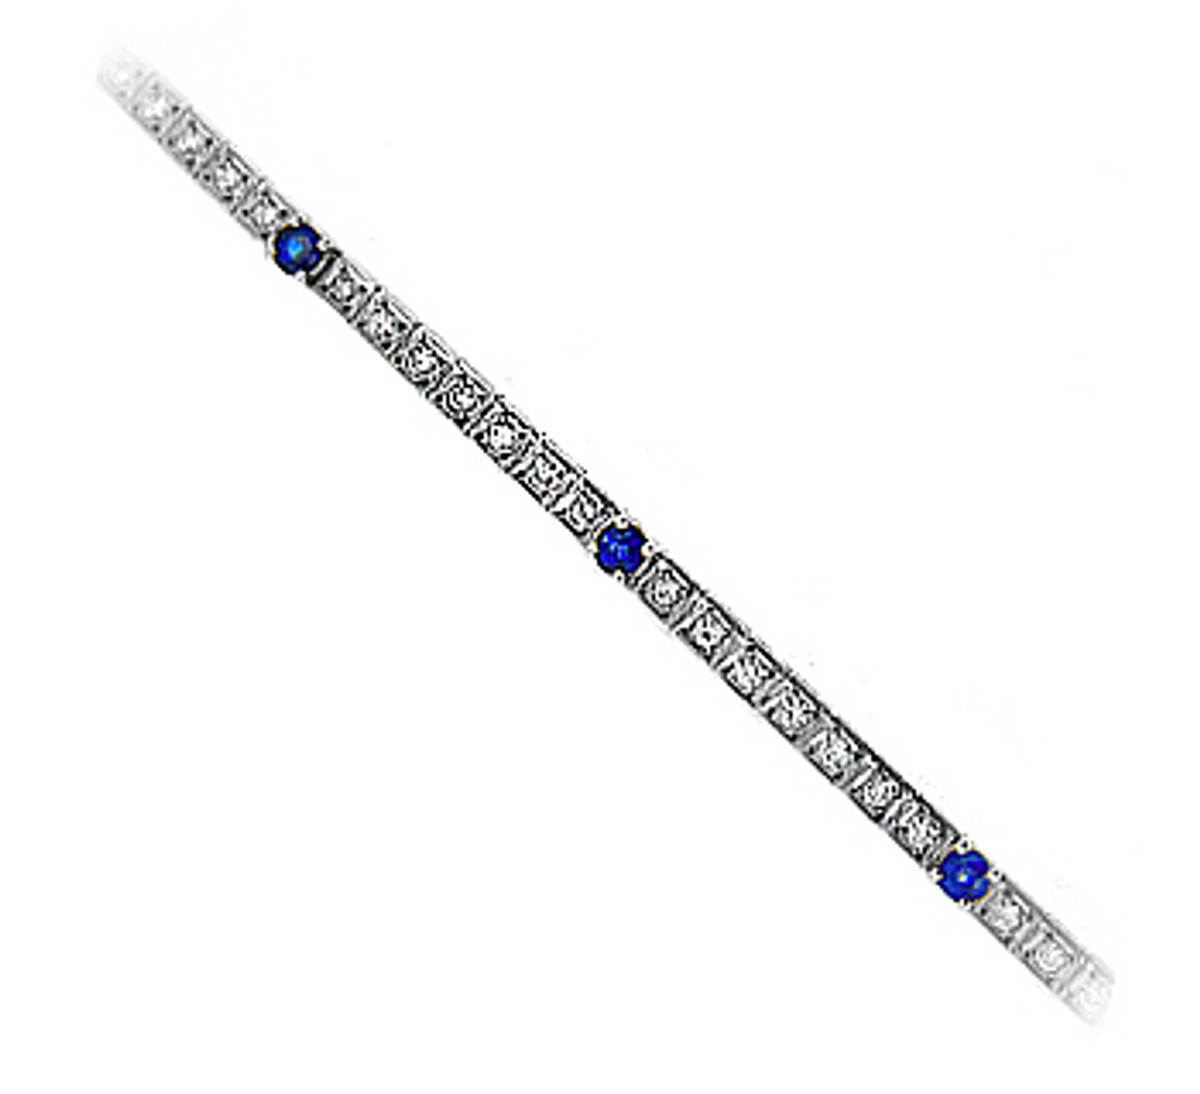 Sapphire and diamond line braceletAvailable in: 18k white gold, 18k yellow goldPictured item: 1.15ct brilliant cut diamonds/0.70cts sapphire  set in 18k white gold